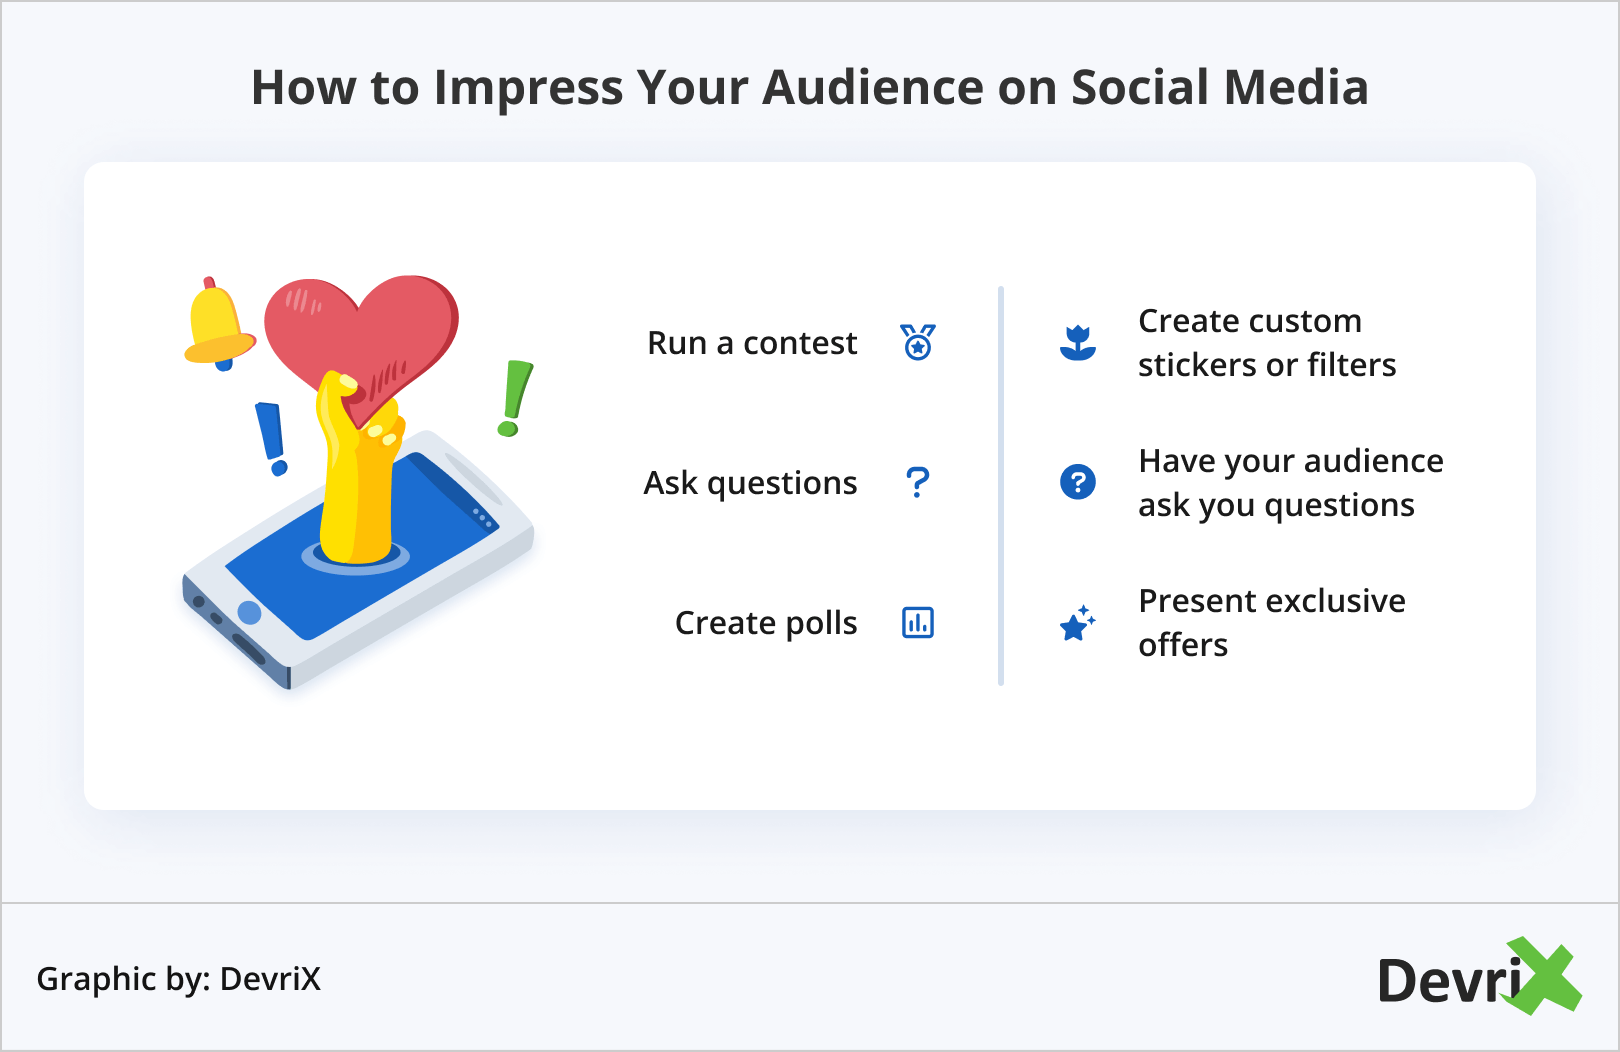 How to Impress Your Audience on Social Media